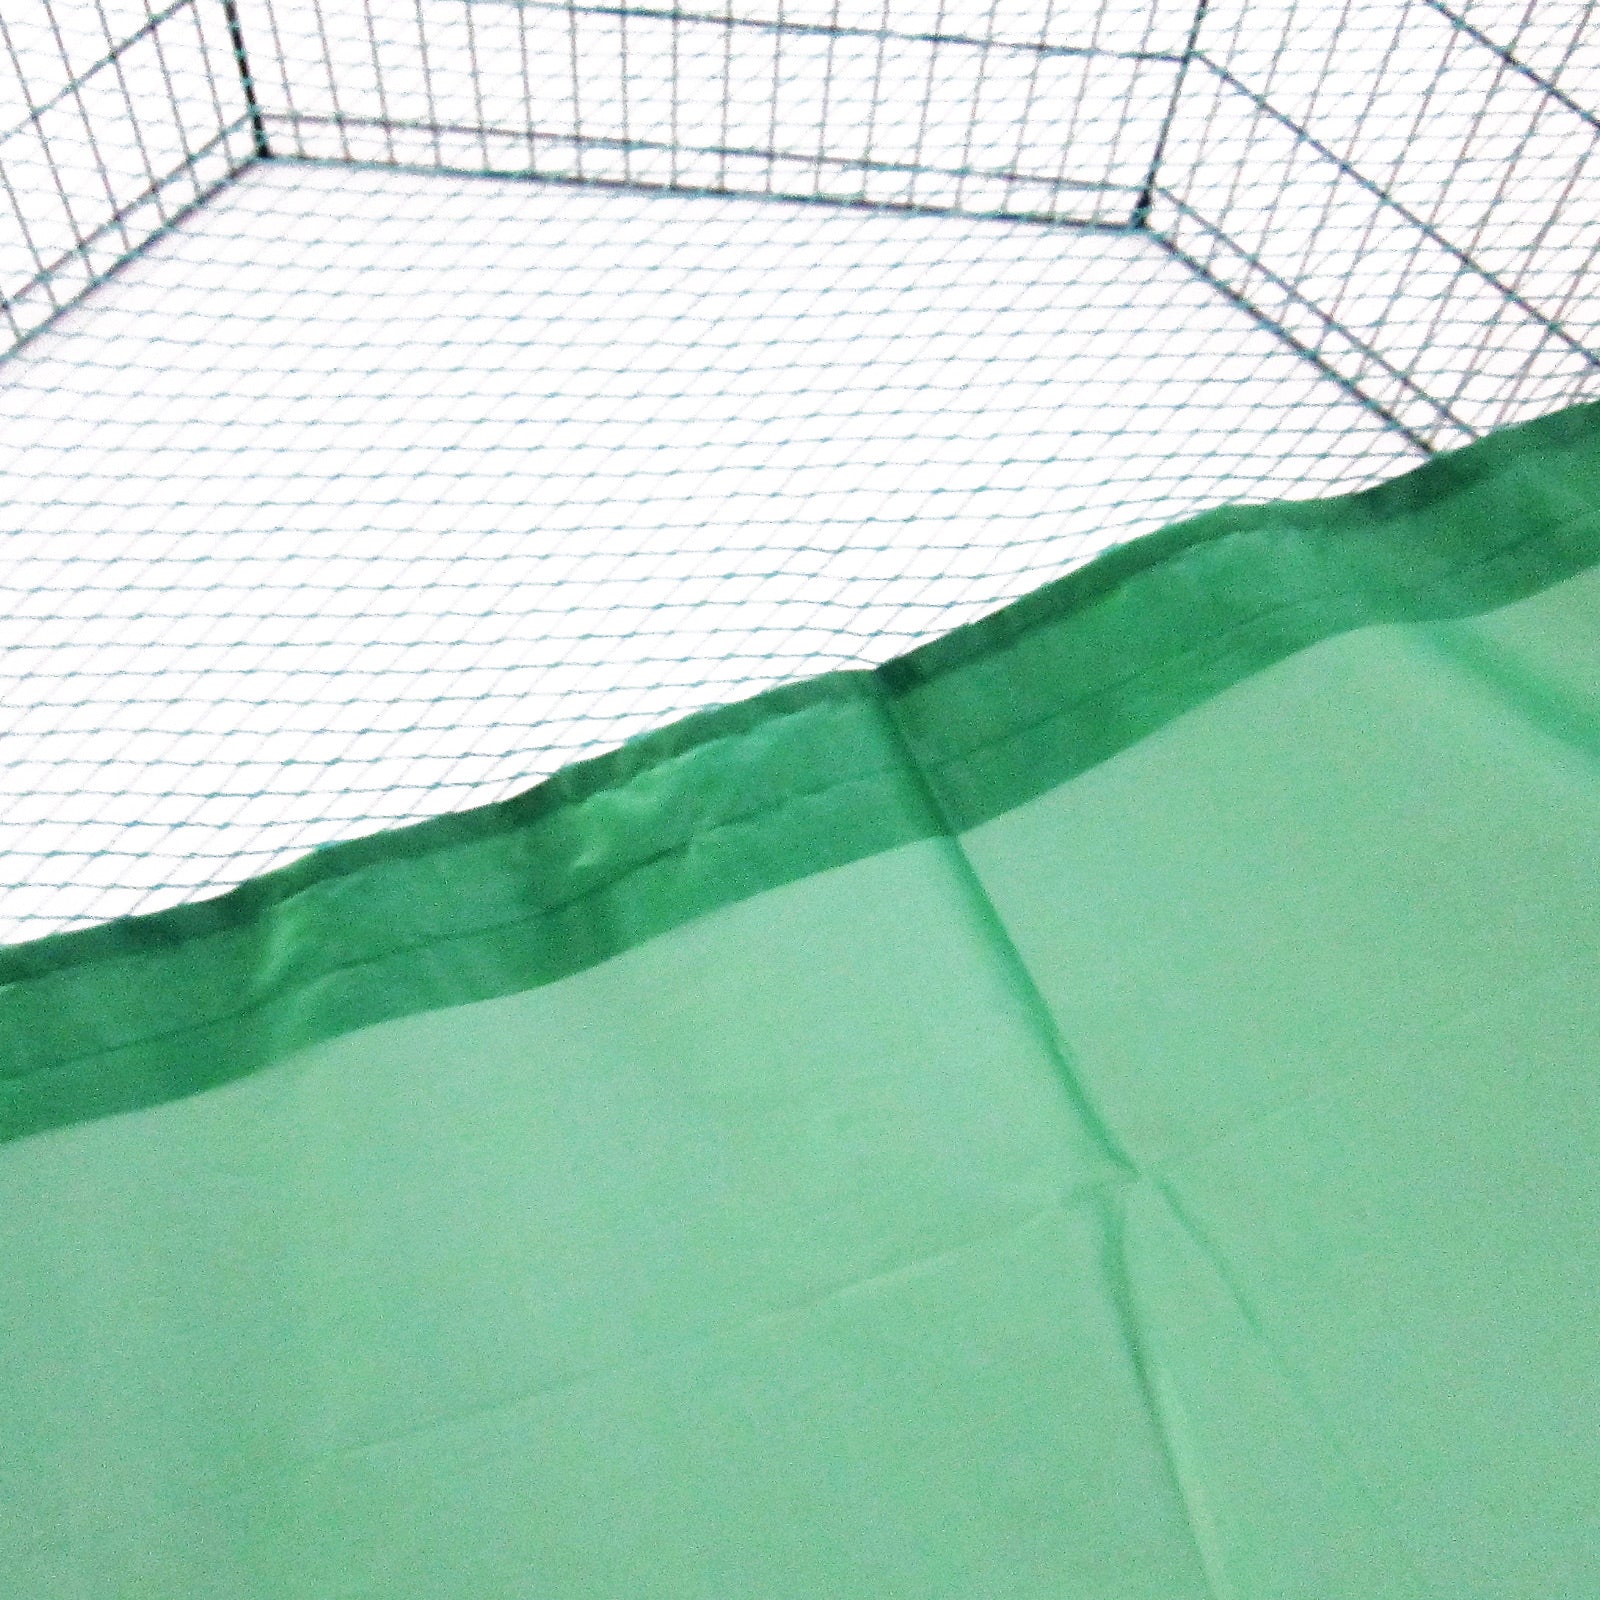 Paw Mate Green Net Cover for Pet Playpen 24in Dog Exercise Enclosure Fence Cage